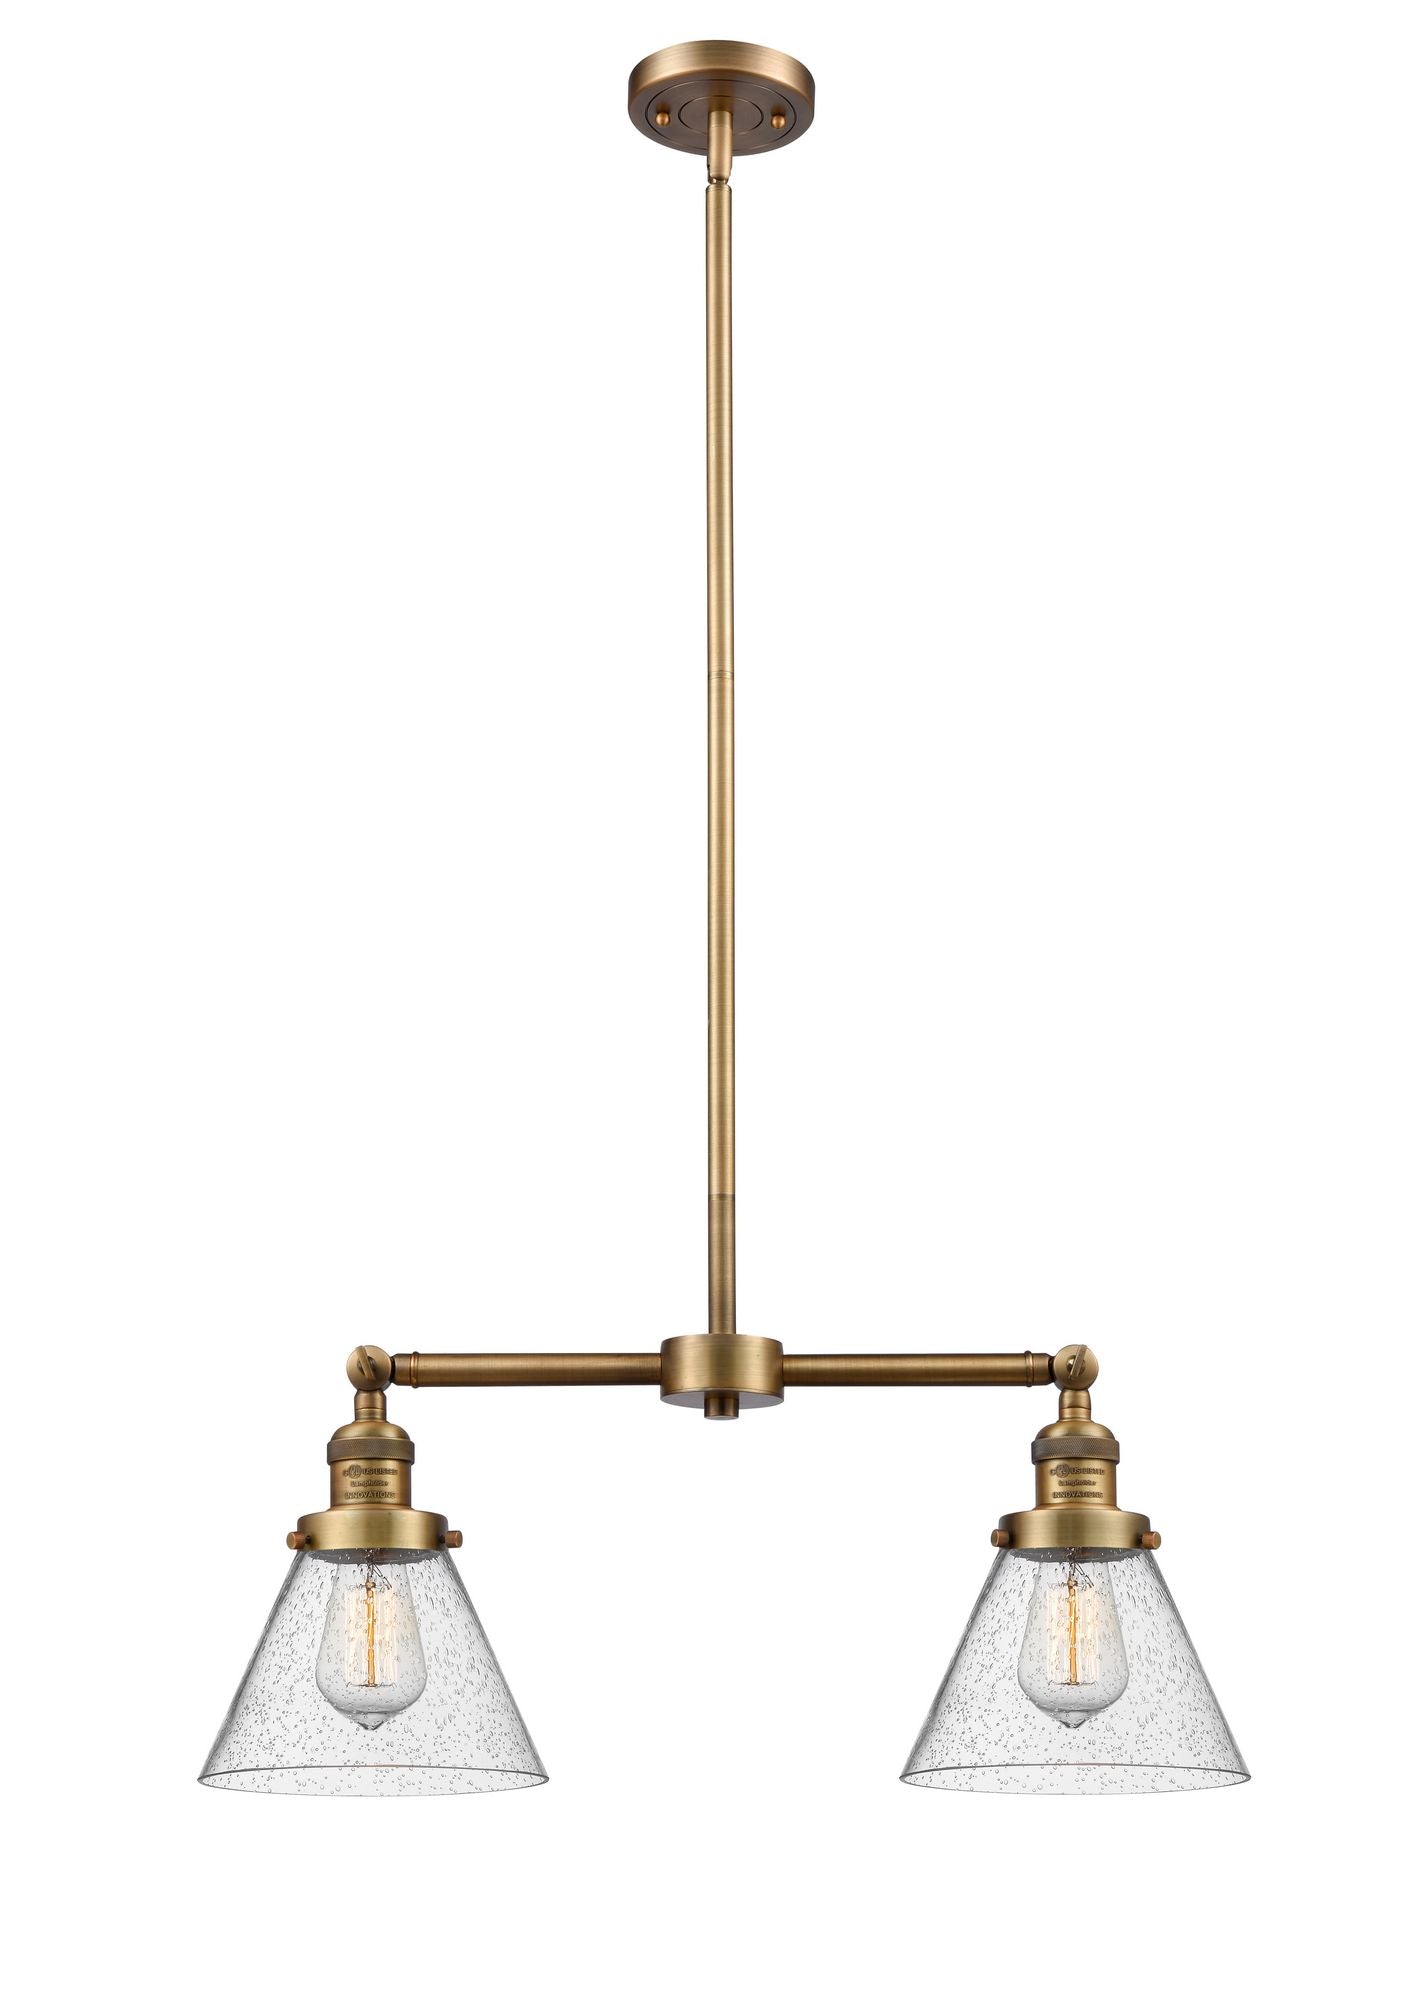 209-BB-G44 2-Light 21" Brushed Brass Island Light - Seedy Large Cone Glass - LED Bulb - Dimmensions: 21 x 5 x 10<br>Minimum Height : 21.125<br>Maximum Height : 45.125 - Sloped Ceiling Compatible: Yes